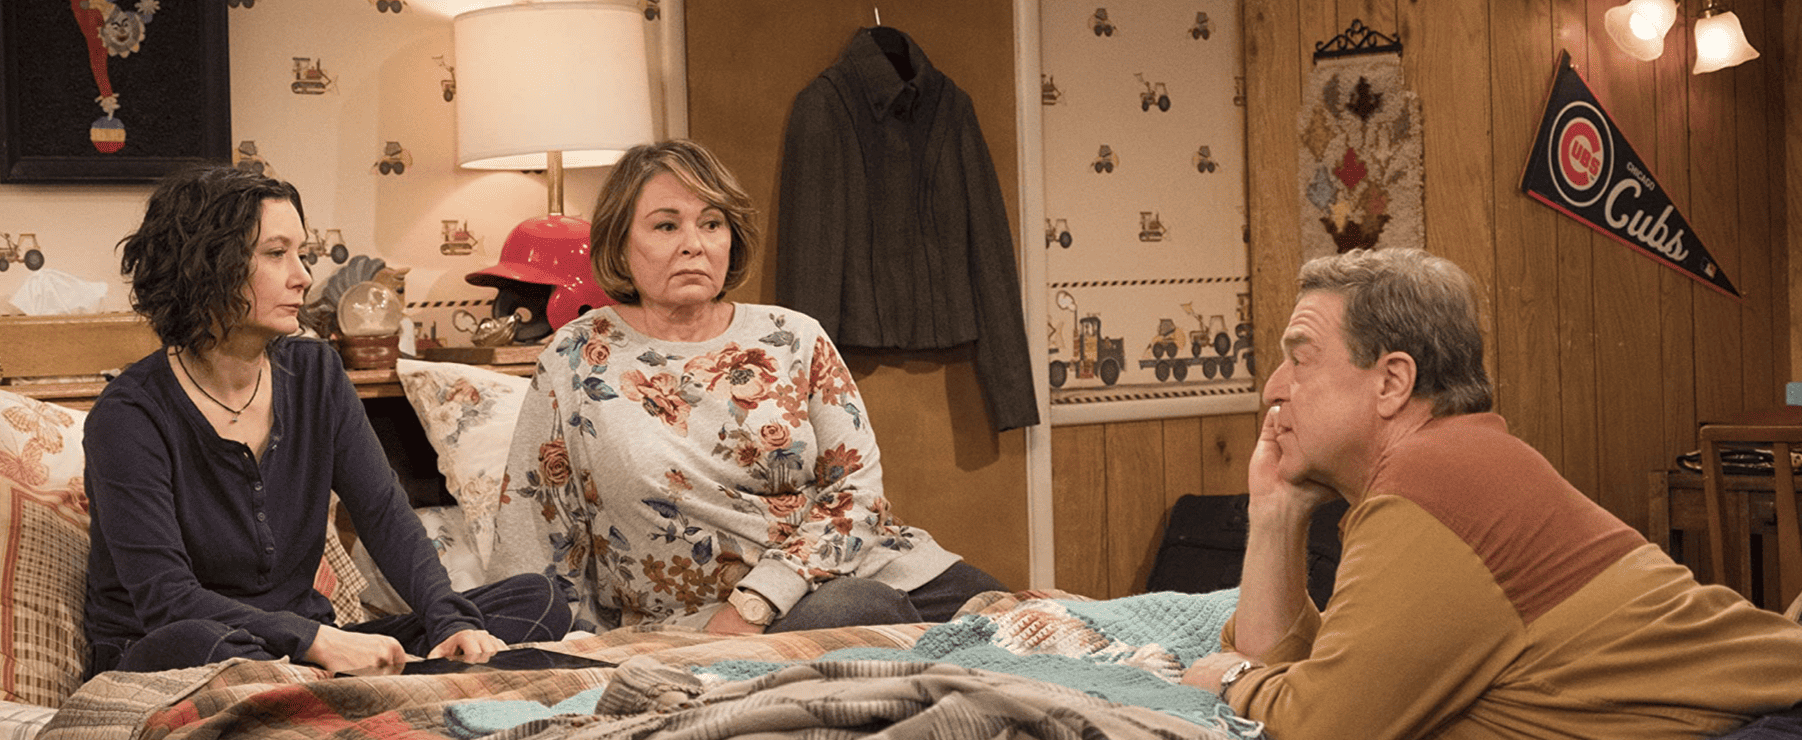 Roseanne sitting on her bed in this image from The Carsey-Werner Company